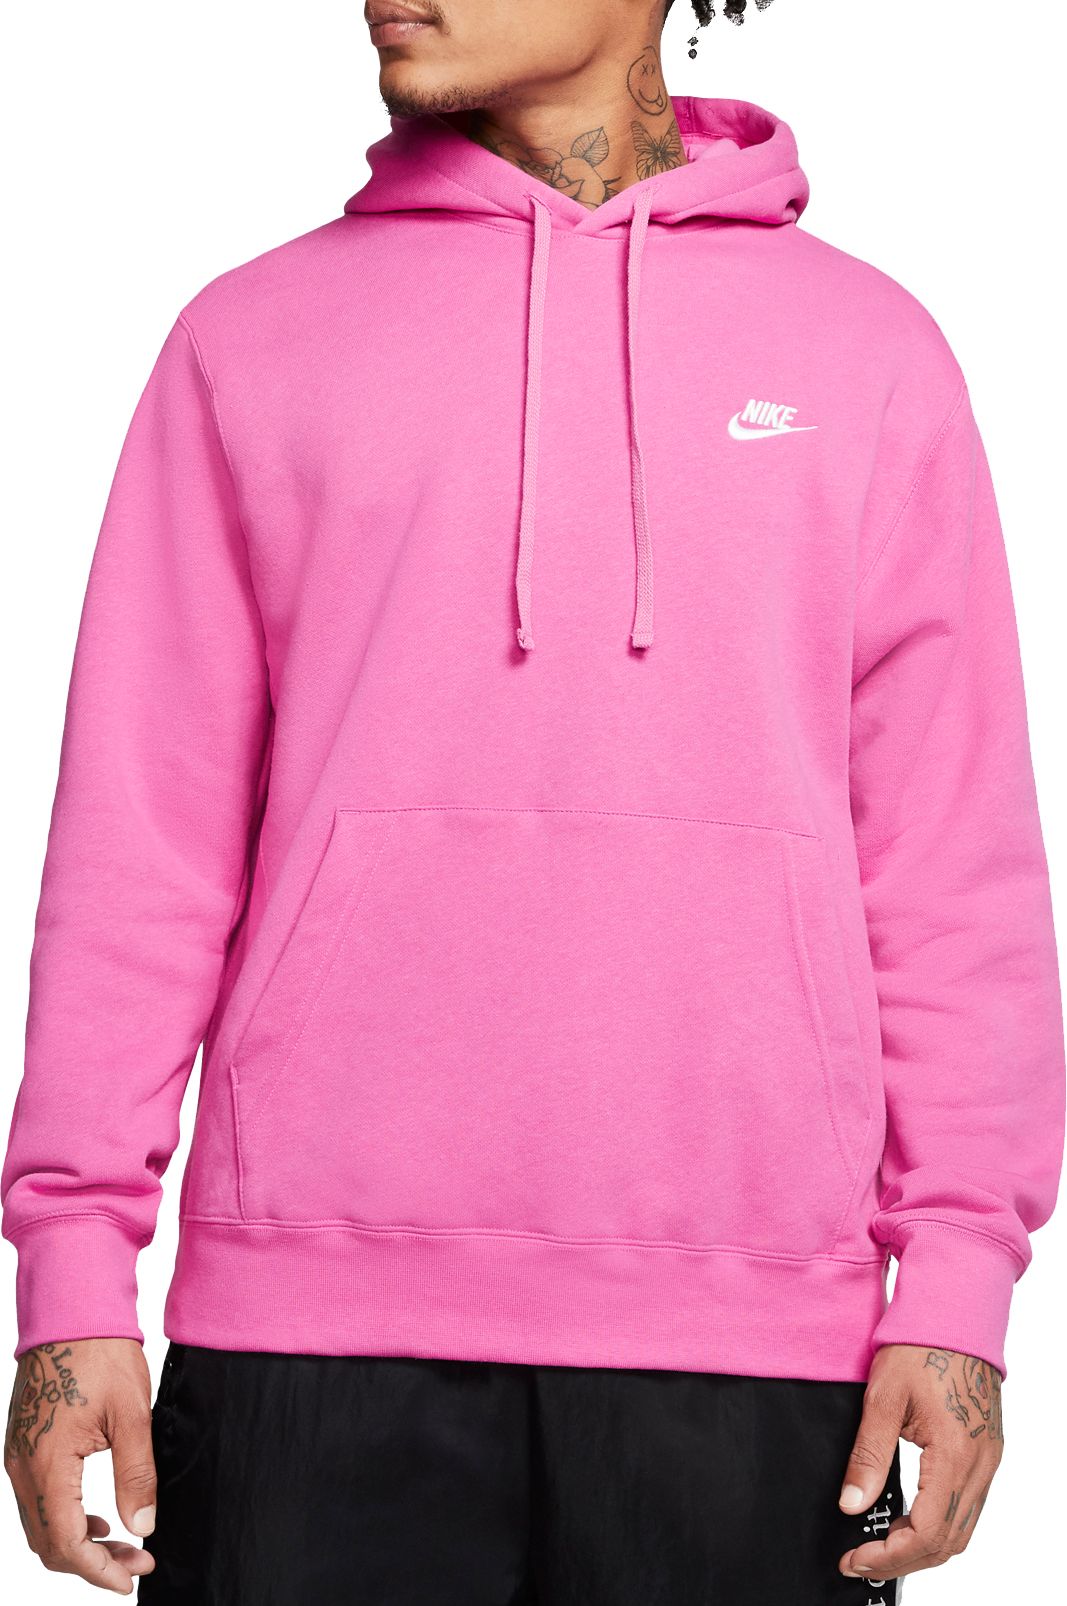 black and pink nike jogging suit